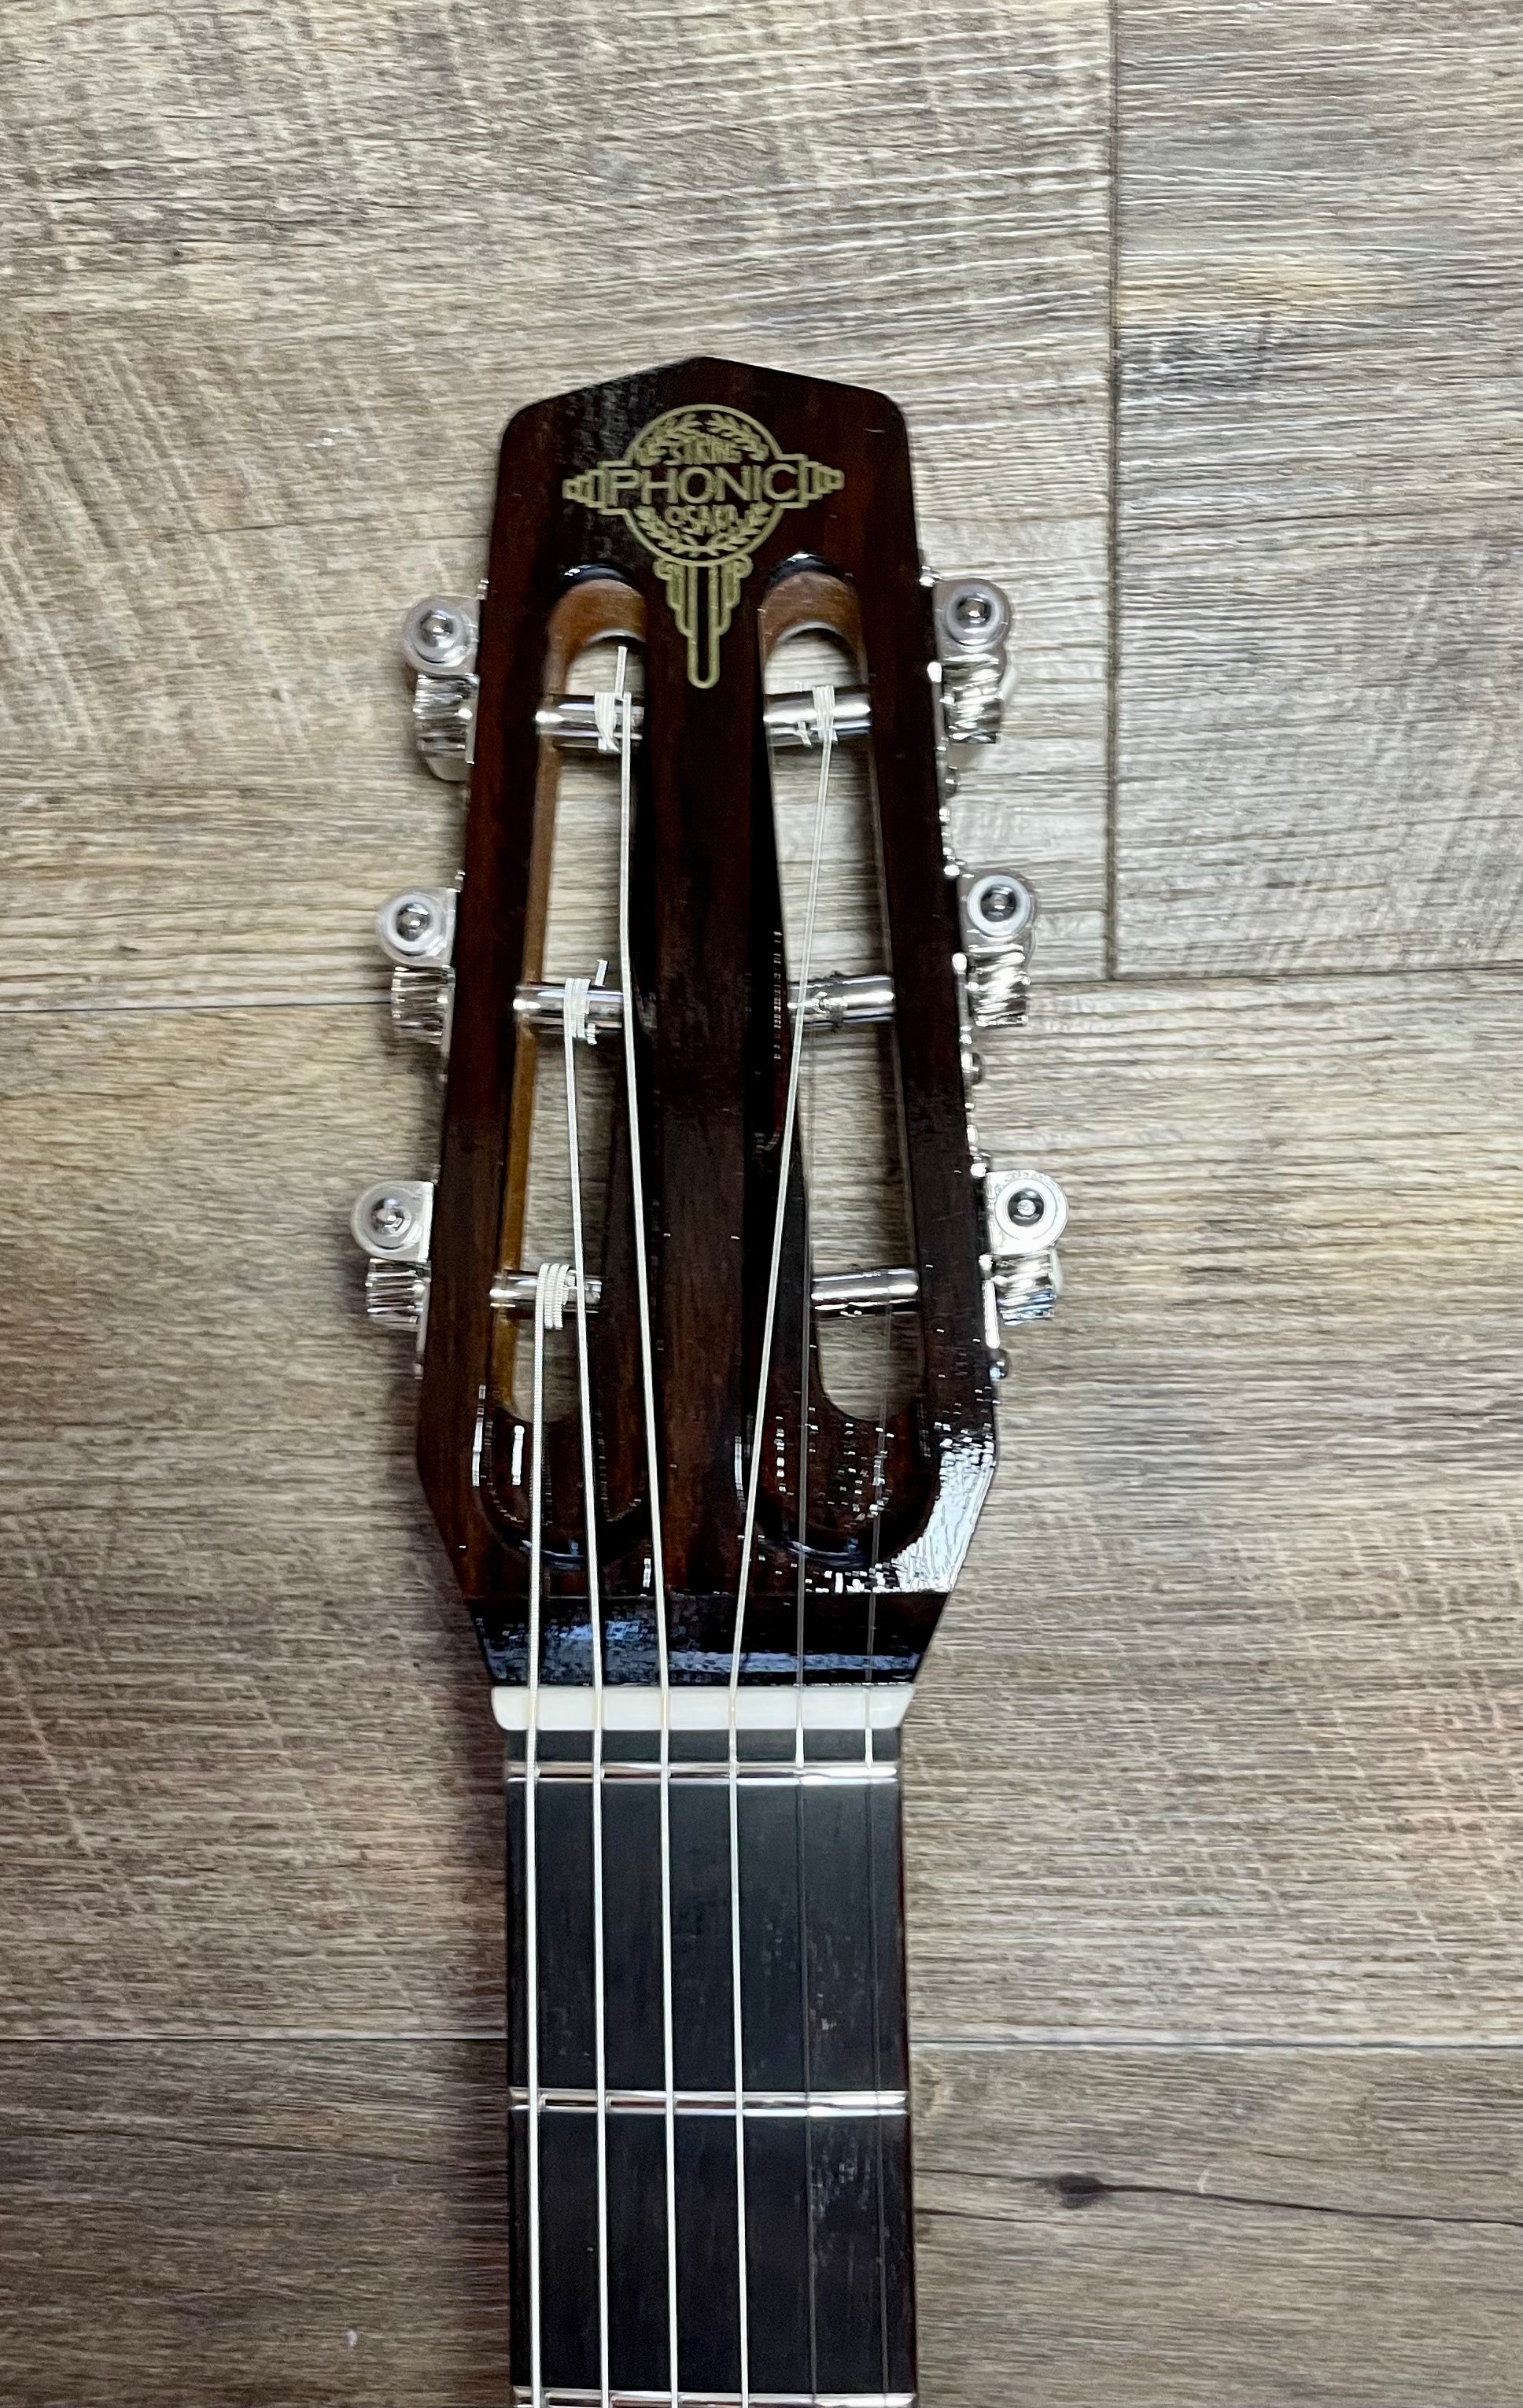 Stringphonic Replica #503 Indian Rosewood (SOLD)